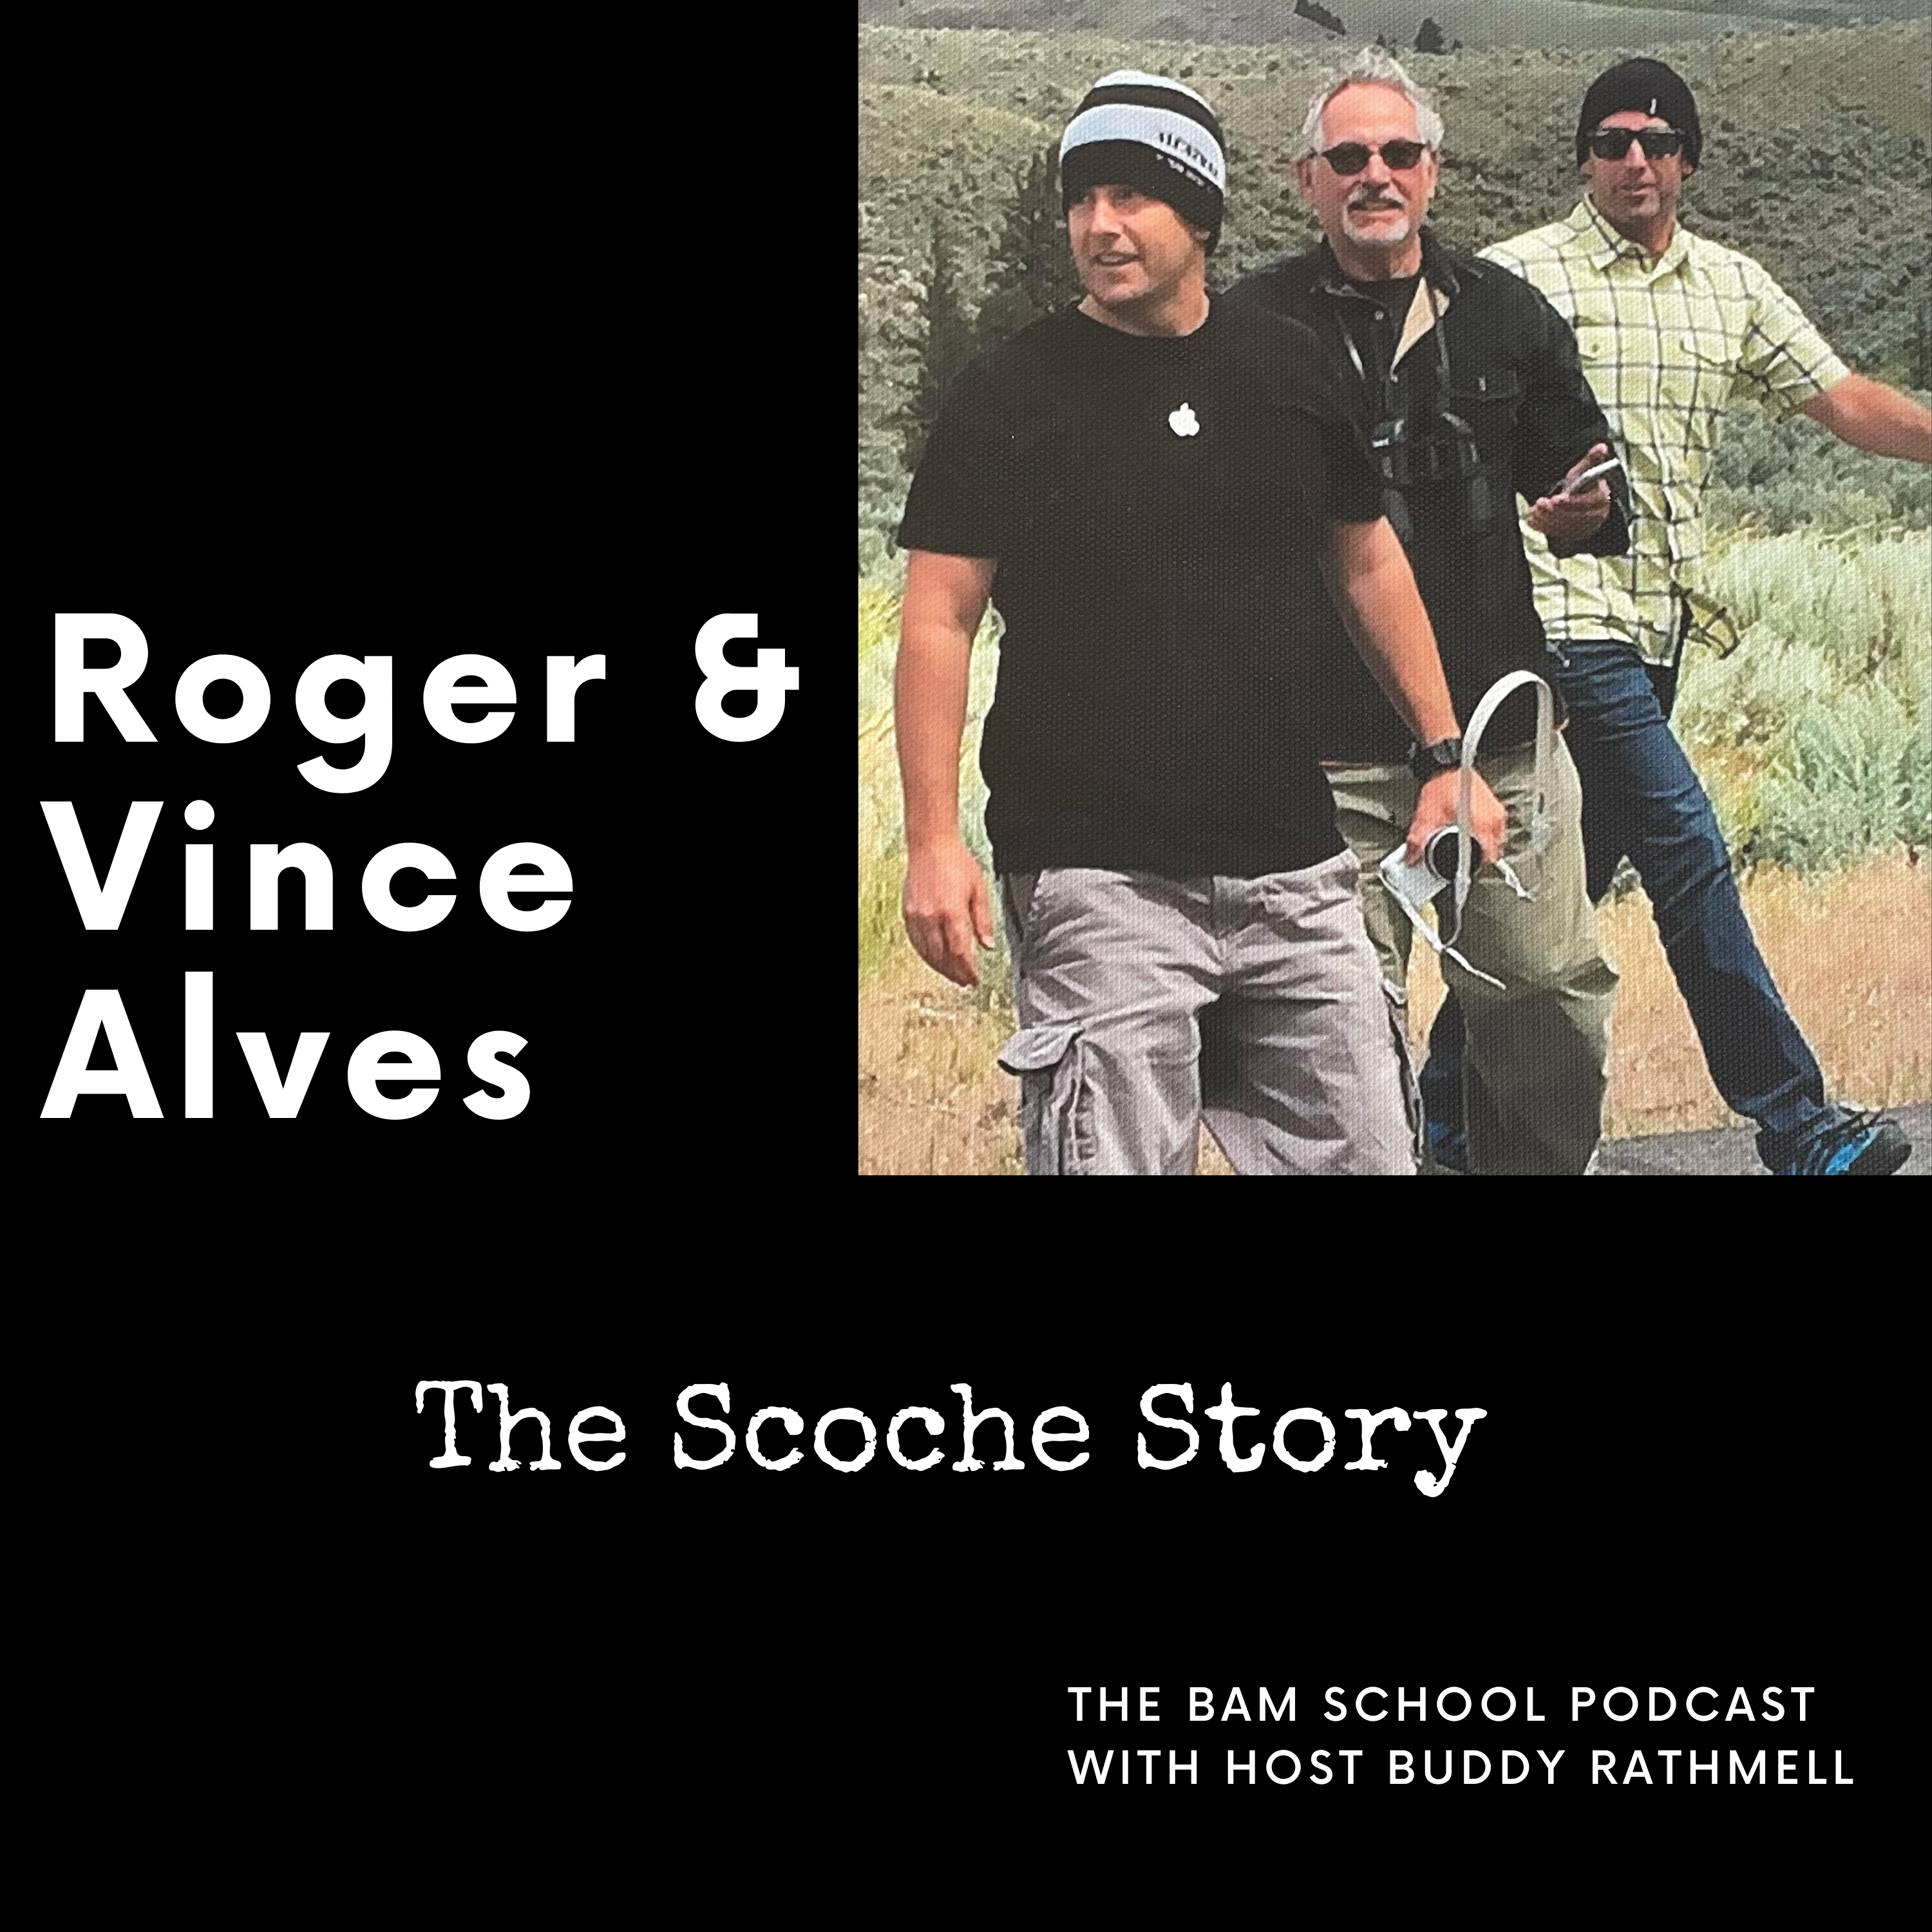  The Scosche Story.  The mountains and valleys of business with a strong faith foundation.  With Roger & Vince Alves.  